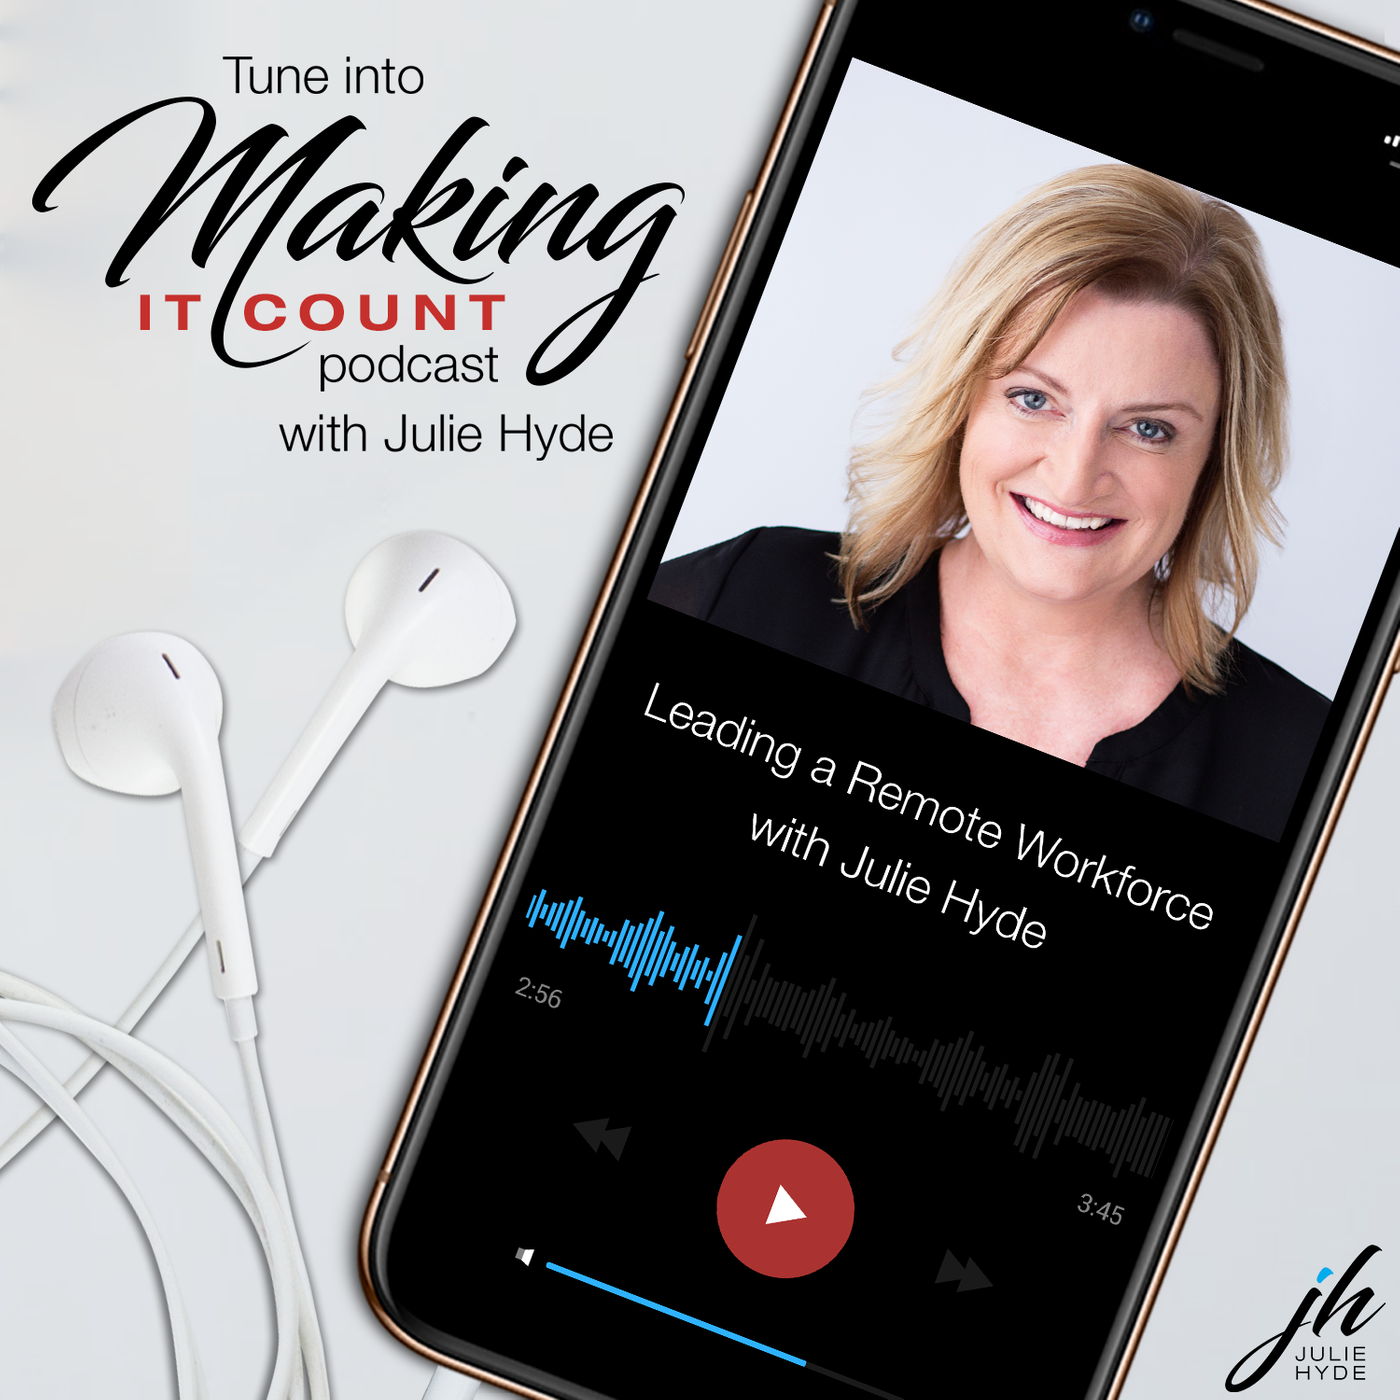 leading-a-remote-workplace-julie-hyde-making-it-count-busy-leadership-leader-leaders-keynote-mindset-speaker-mentor-business-empower-lead-empowering-podcast-great-intentional-authentic-mentor-coach-role-model-top-best-inspire-engage-practical-insightful-boost-performance-tips-how-to-strategy-powerful-change-mindset-thrive-results-corporate-future-smart-program-mentorship-career-next-level-step-reconnect-control-proactive-agile-adaptable-one-on-one-woman-lady-boss-female-sydney-australia-speaker-host-guide-guidance-business-ceo-management